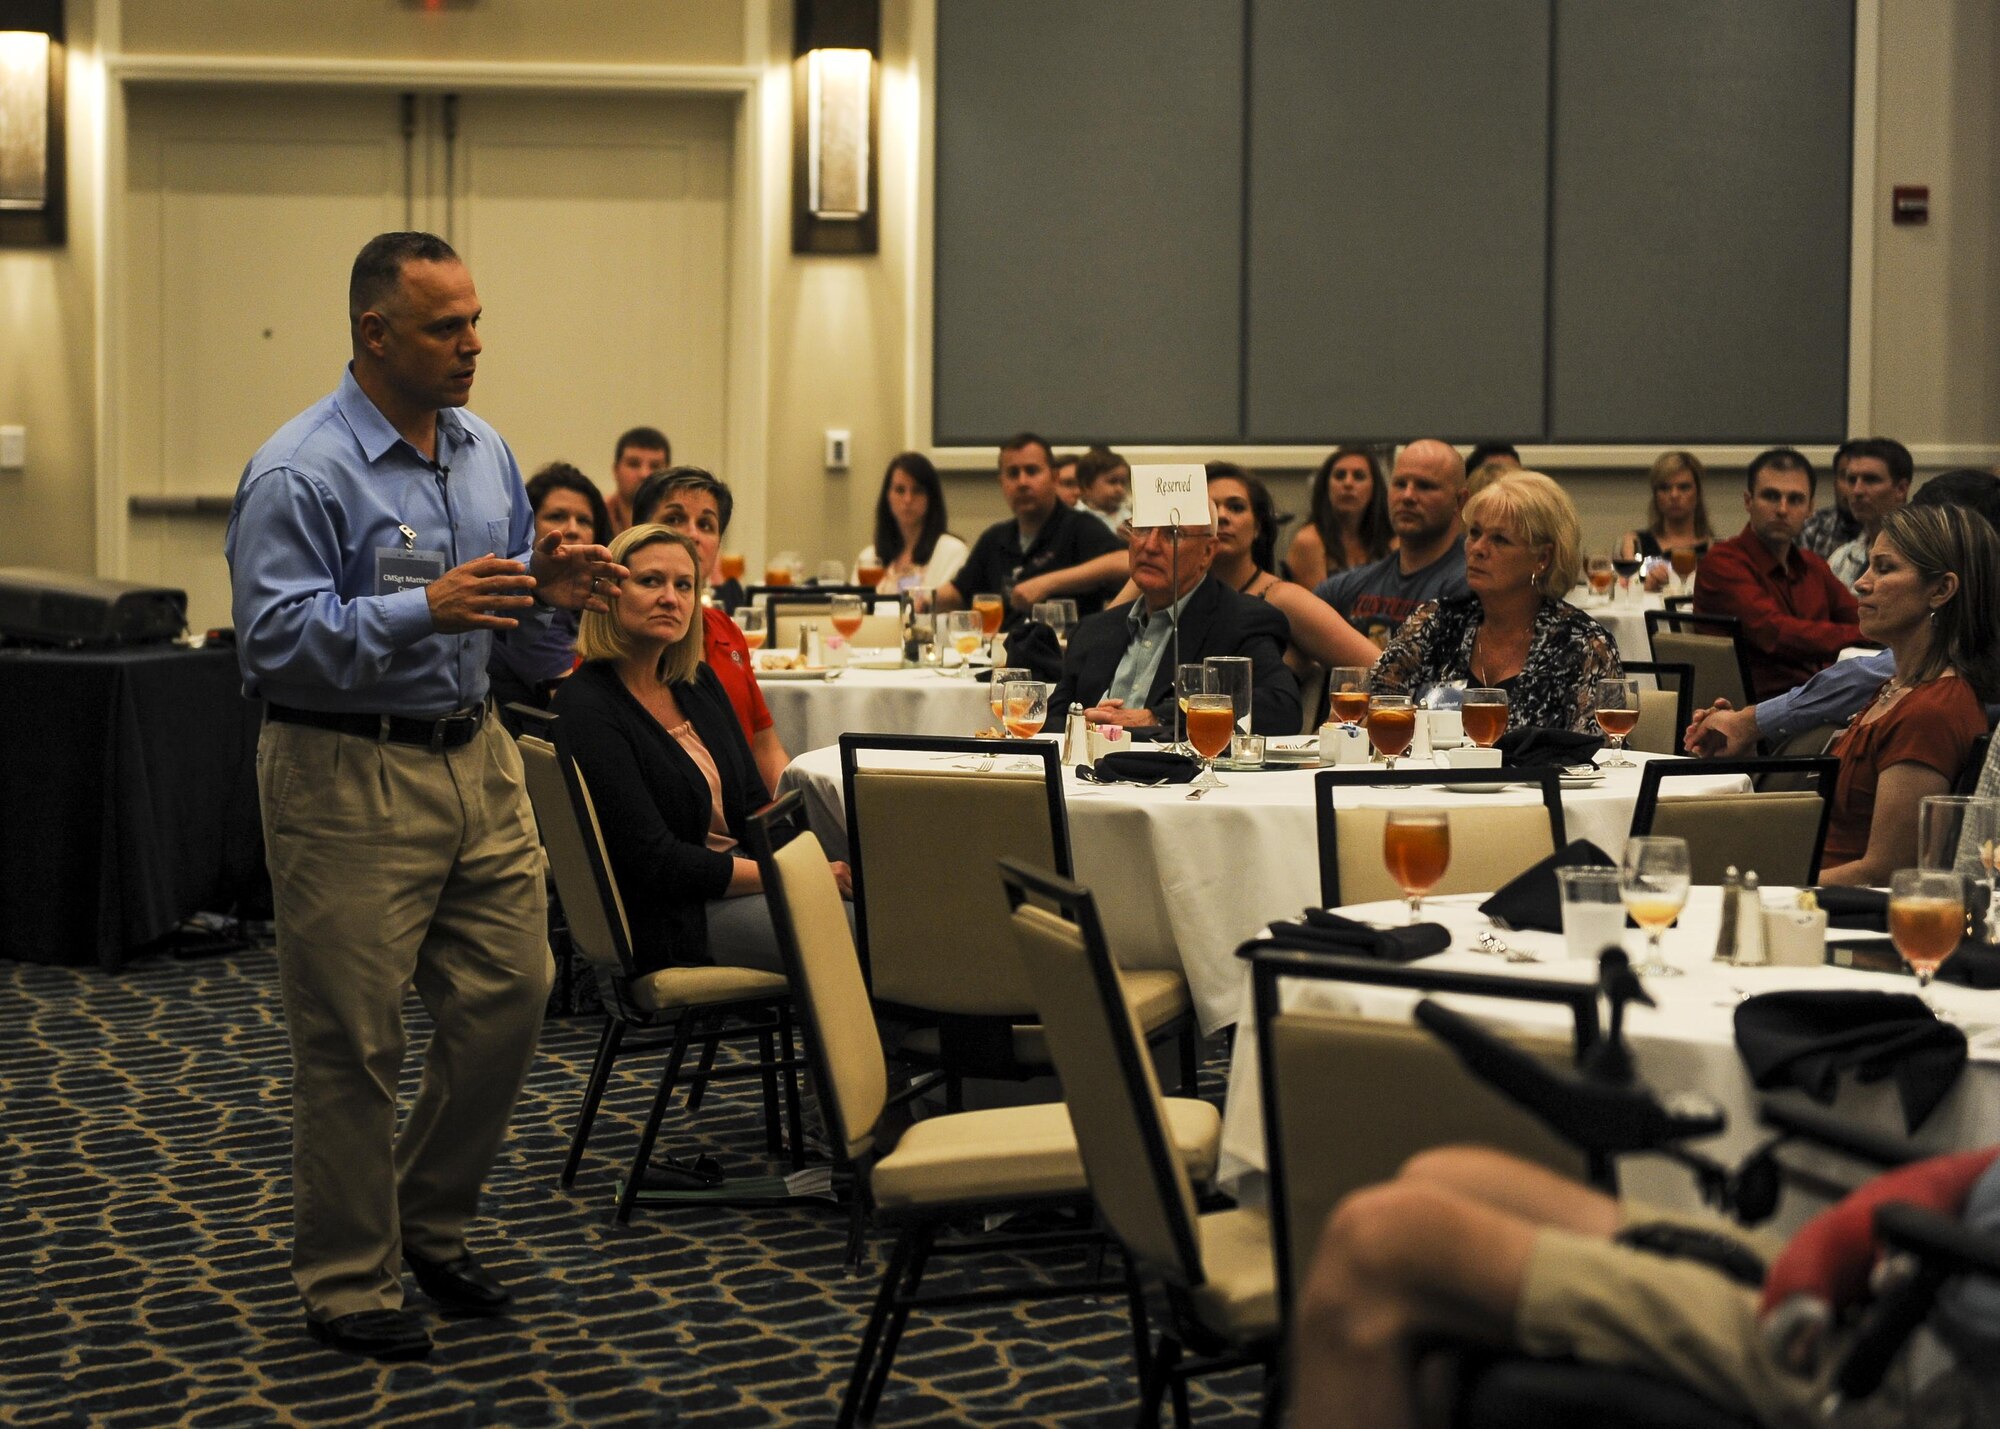 Chief Master Sgt. Matt Caruso, command chief of Air Force Special Operations Command, speaks during the AFSOC Warrior C.A.R.E. Summit at the Hilton Sandestin Beach Golf Resort & Spa April 26, 2016. Nearly 50 Air Commandos attended the event with their family members and caregivers. (U.S. Air Force photo by Senior Airman Meagan Schutter) 